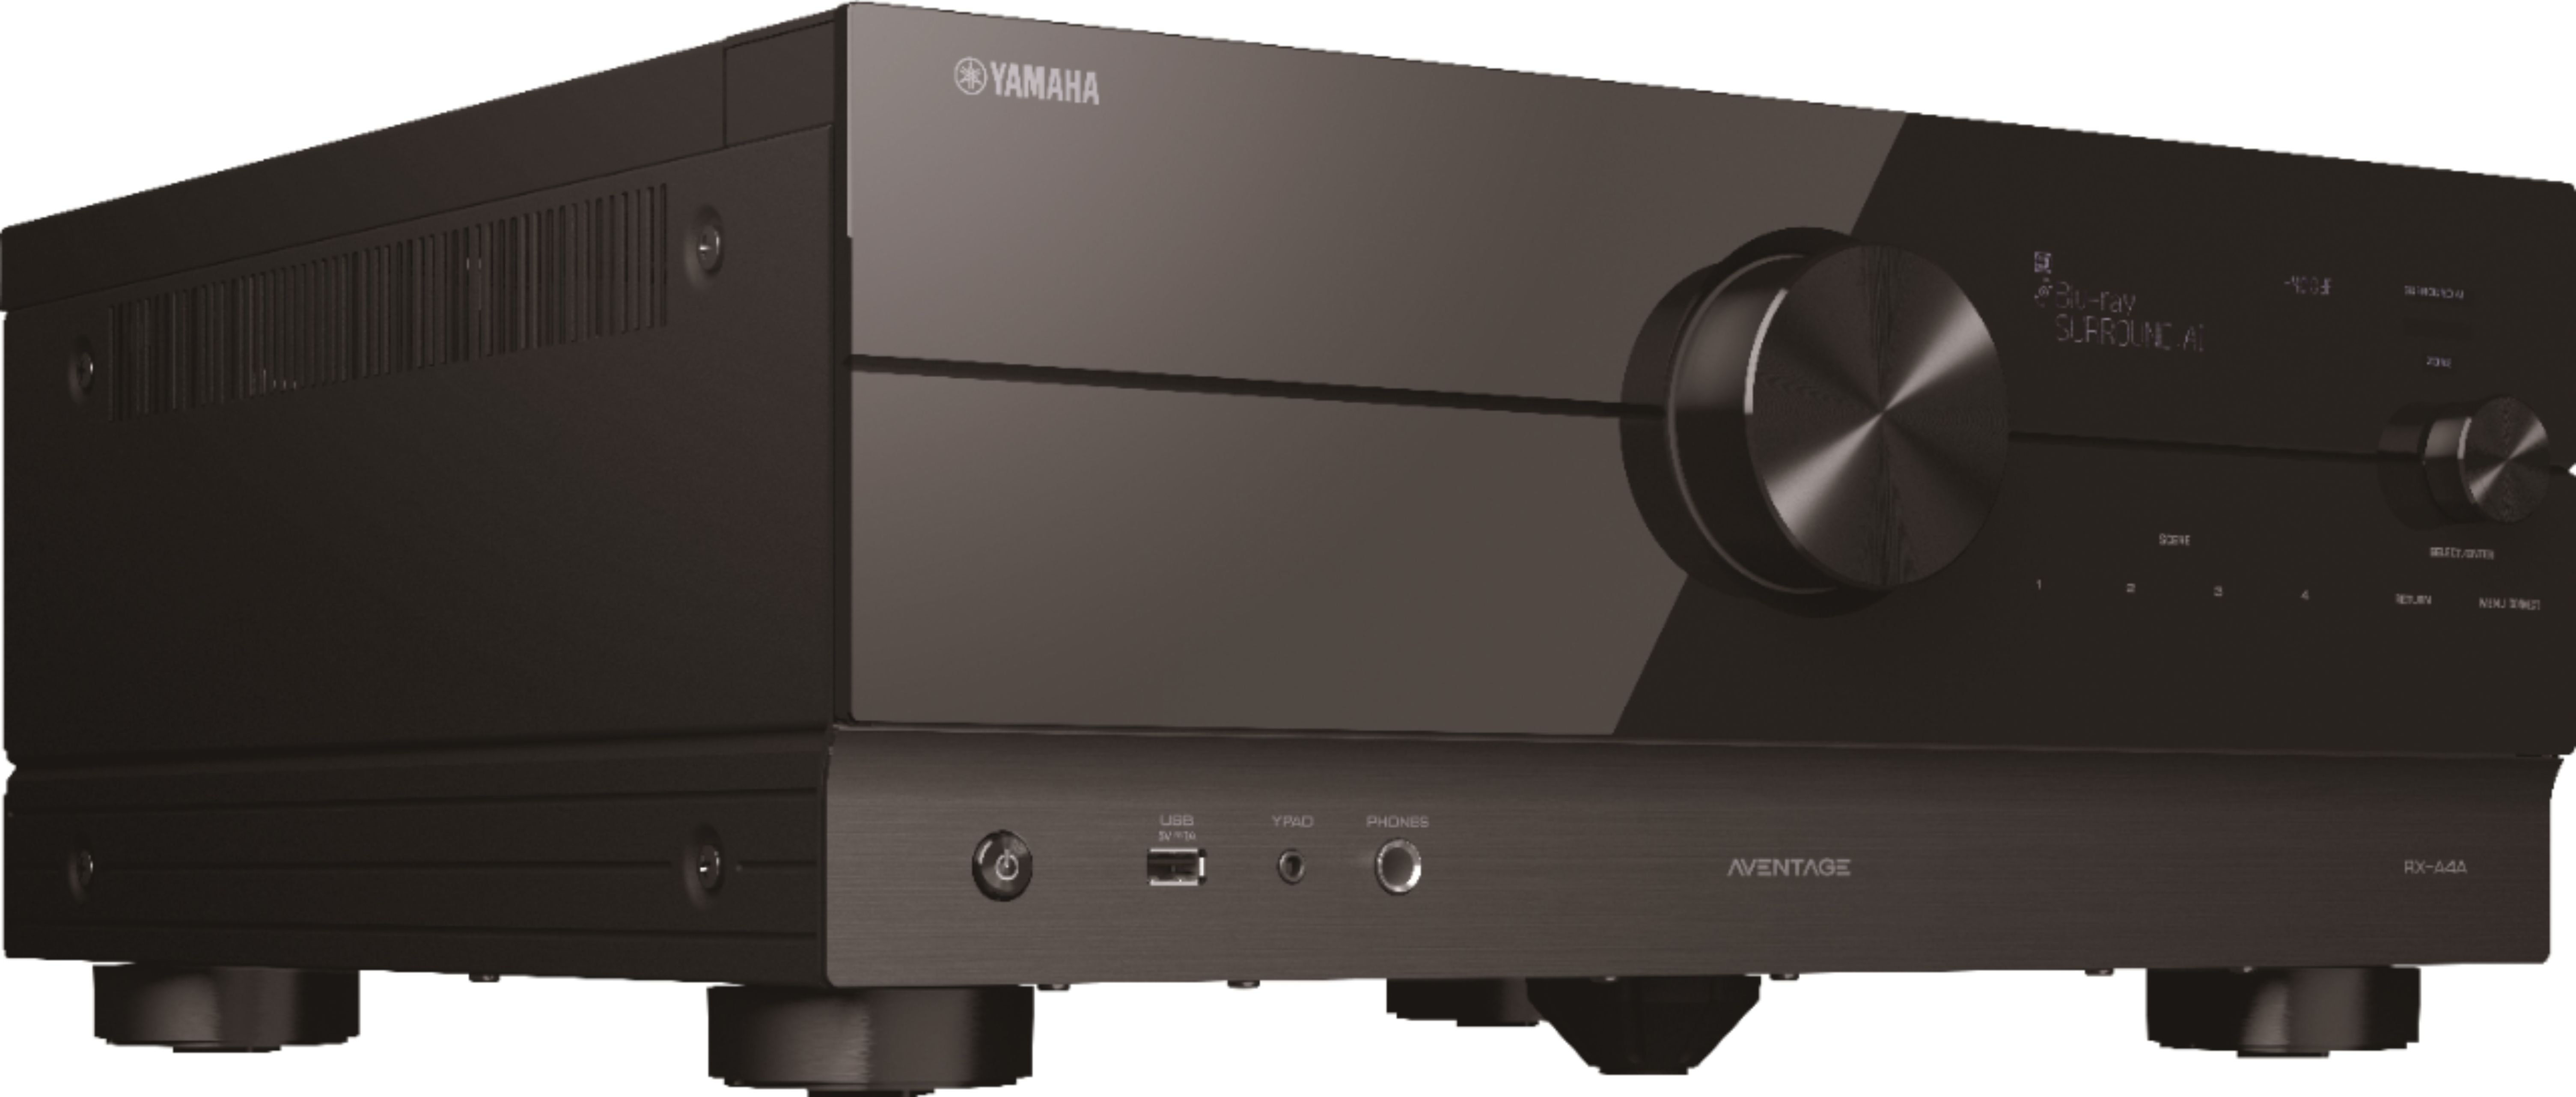 Angle View: Yamaha - AVENTAGE RX-A4A 110W 7.2-Channel AV Receiver with 8K HDMI and MusicCast - Black